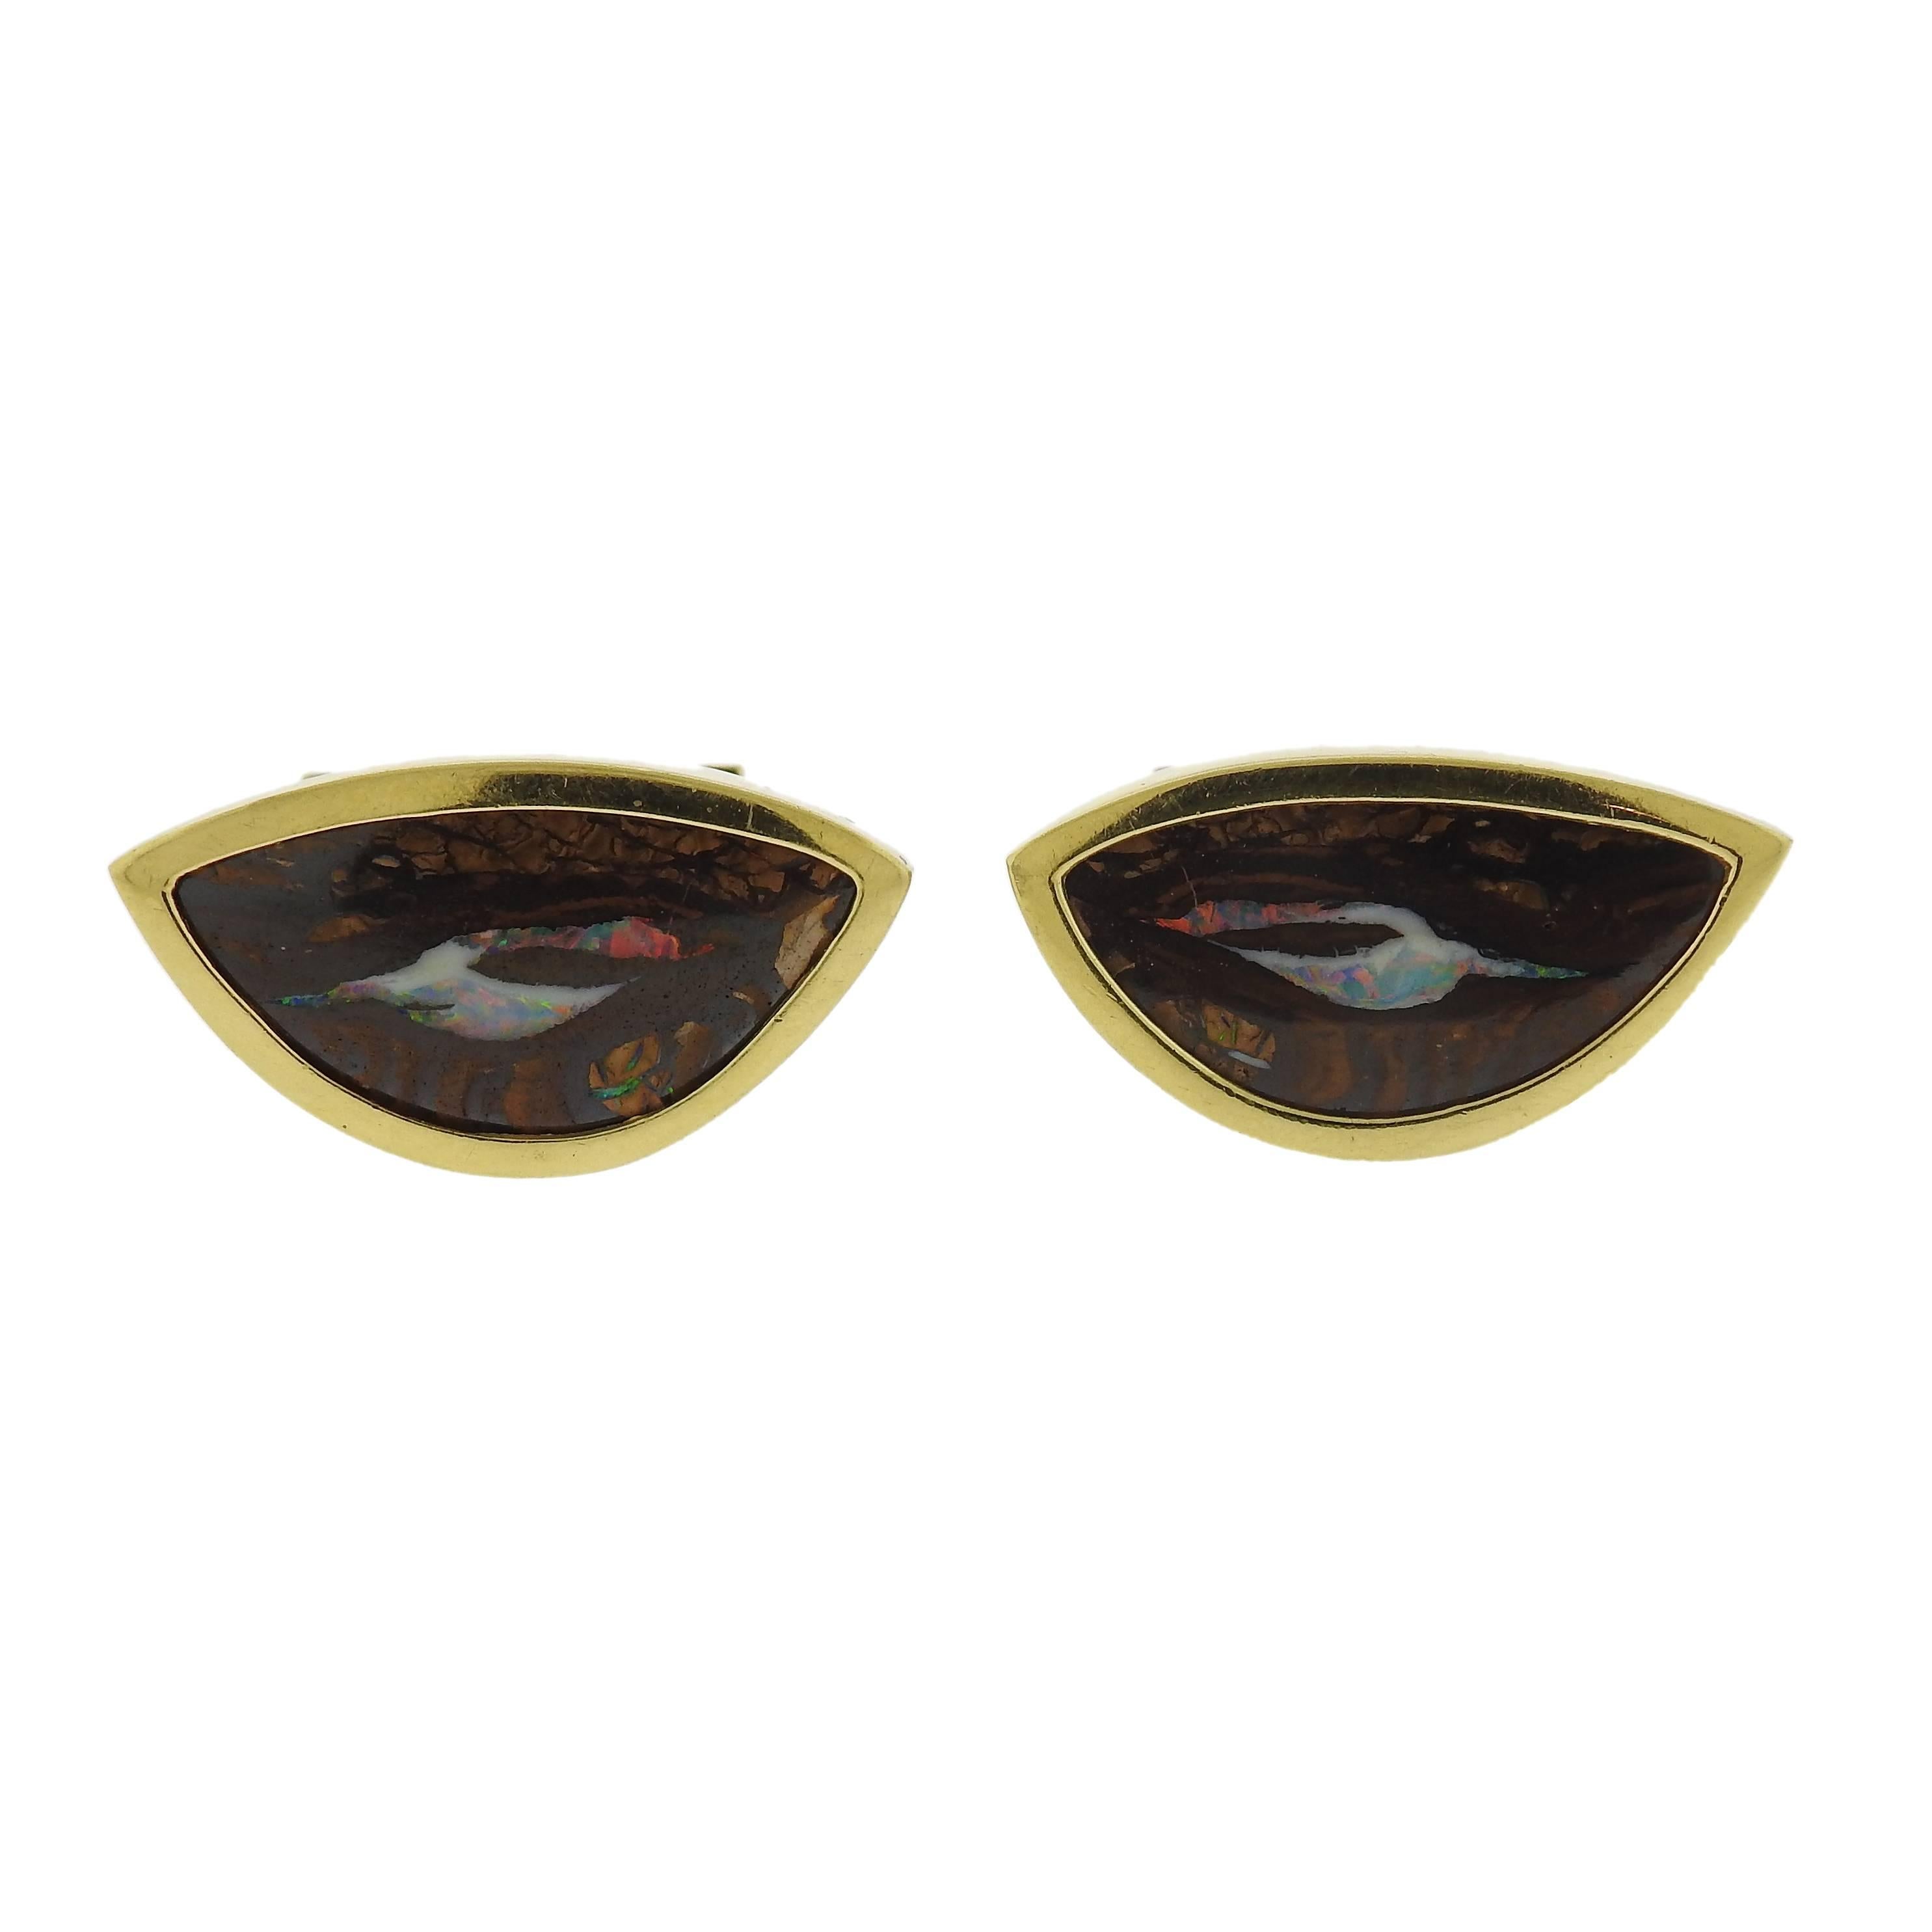 Pair of 18k yellow gold cufflinks, featuring boulder opal stones in the center.   cufflink top measures 31mm x 16mm at widest point. Marked 18k. Weight - 33.5 grams 